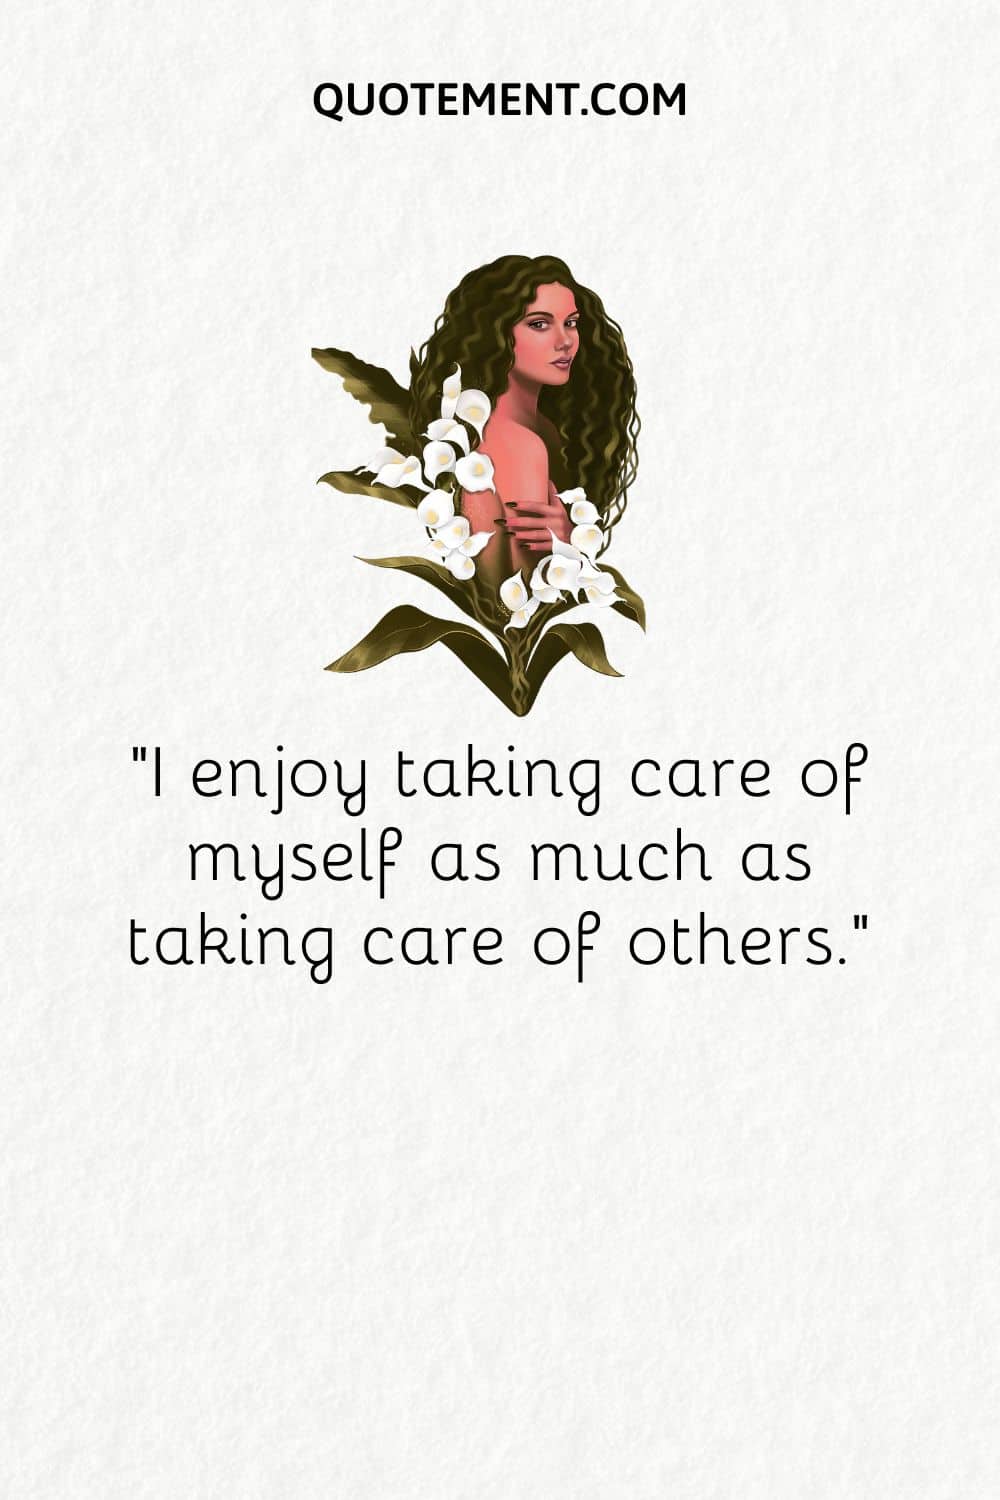 I enjoy taking care of myself as much as taking care of others